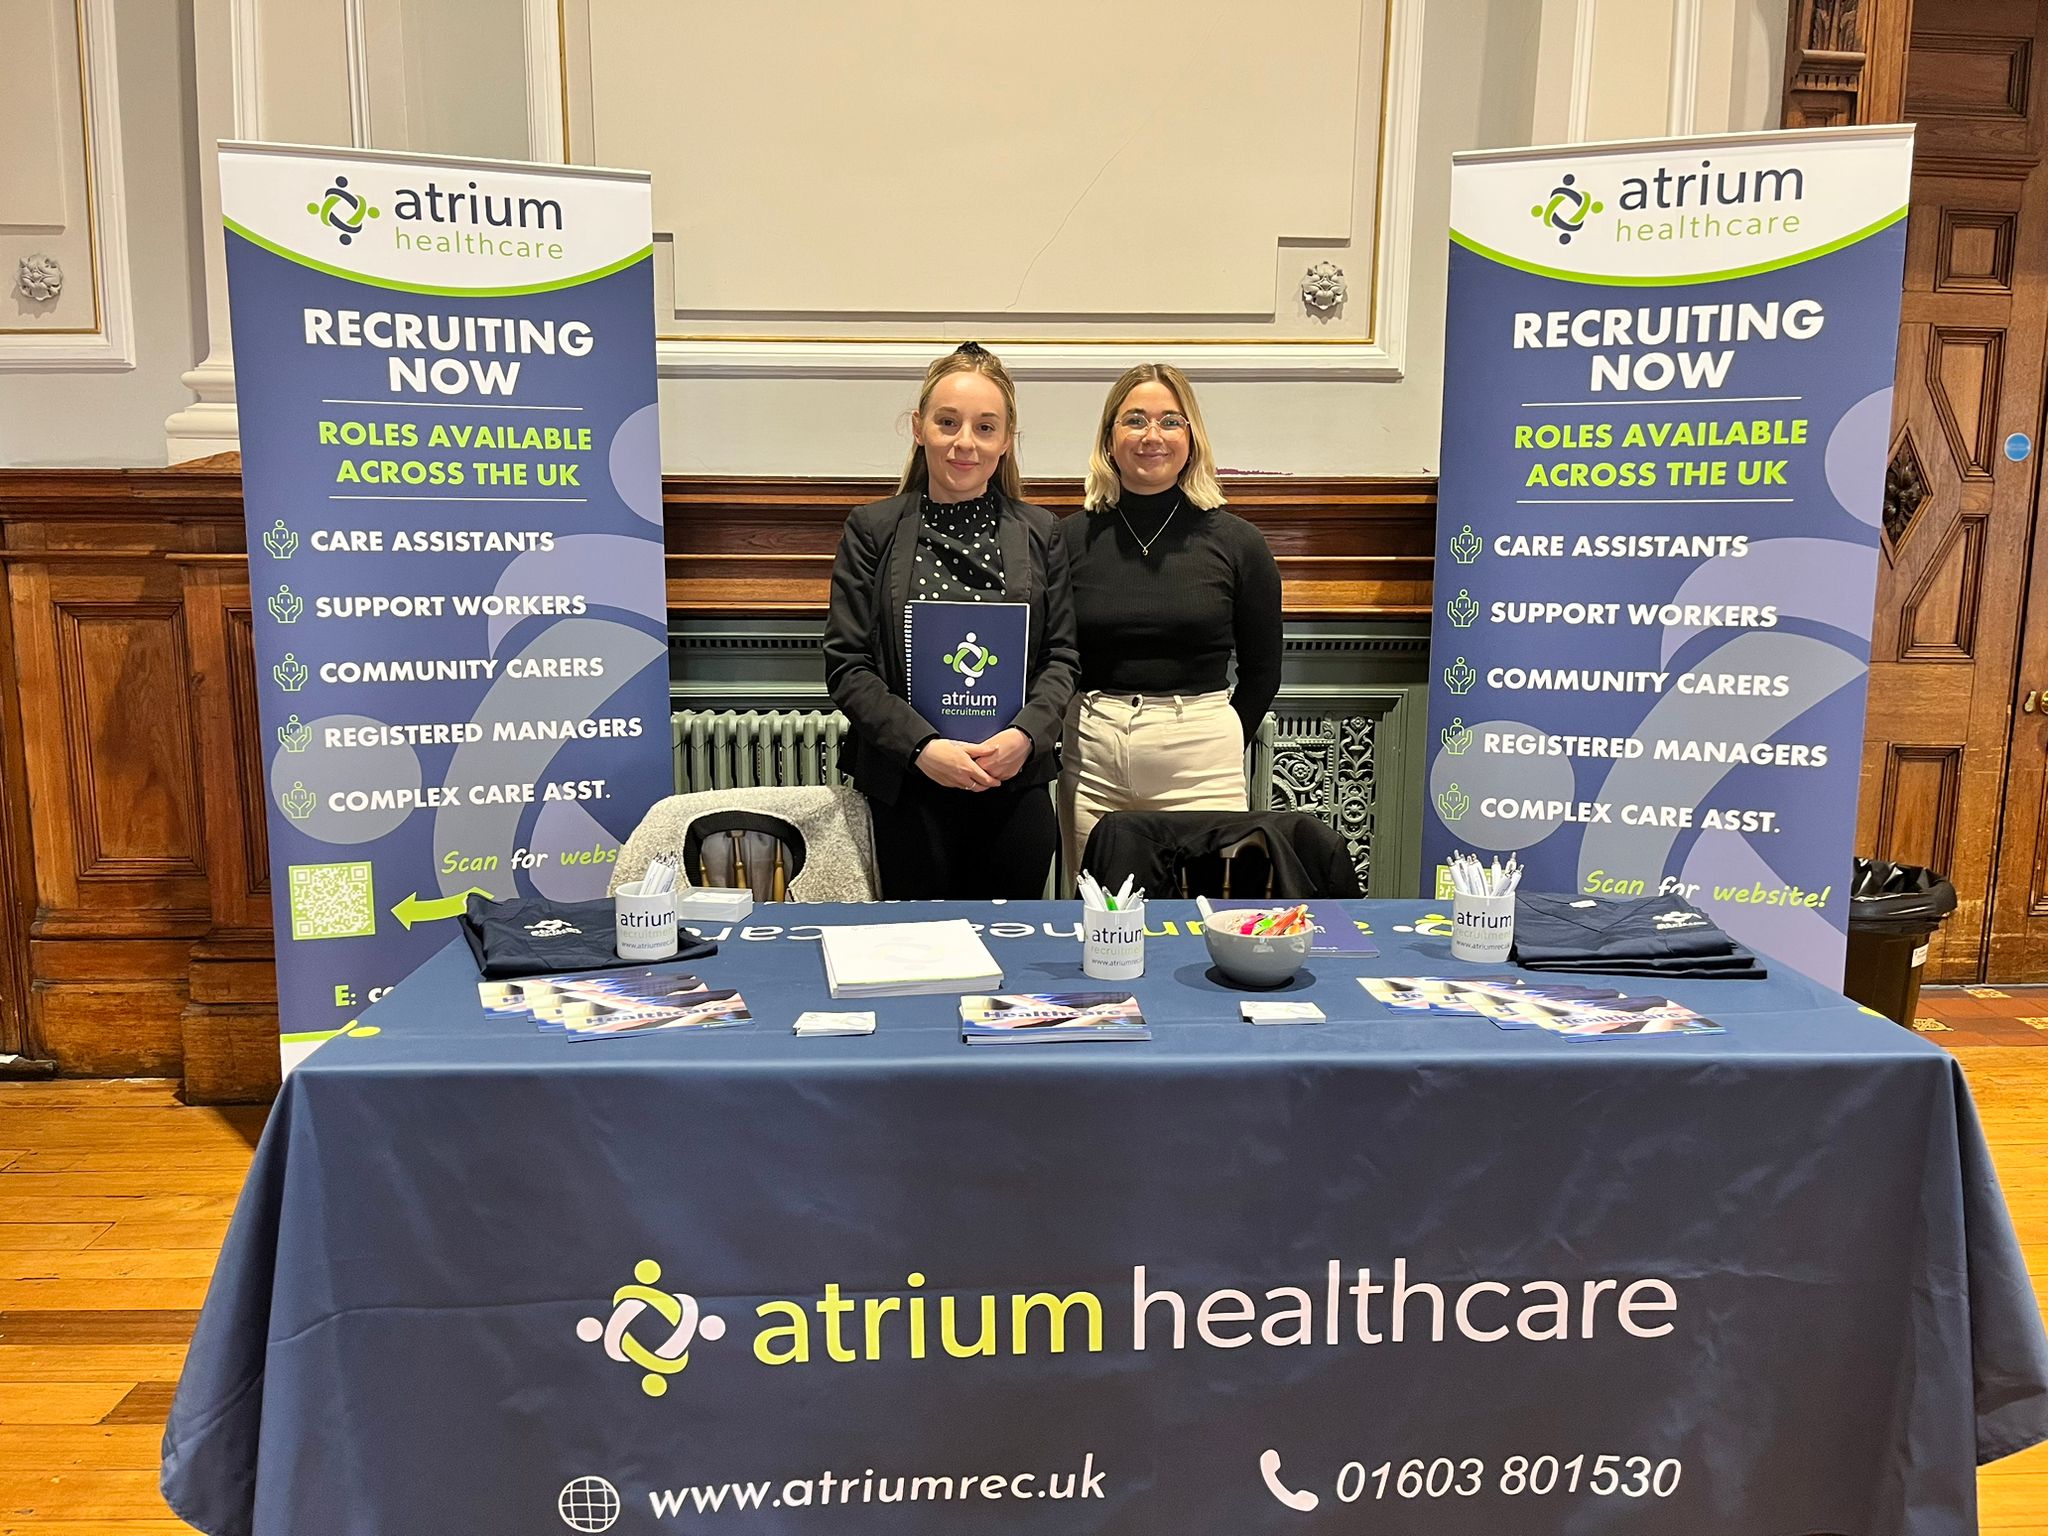 Atrium Recruitment at our event in Great Yarmouth